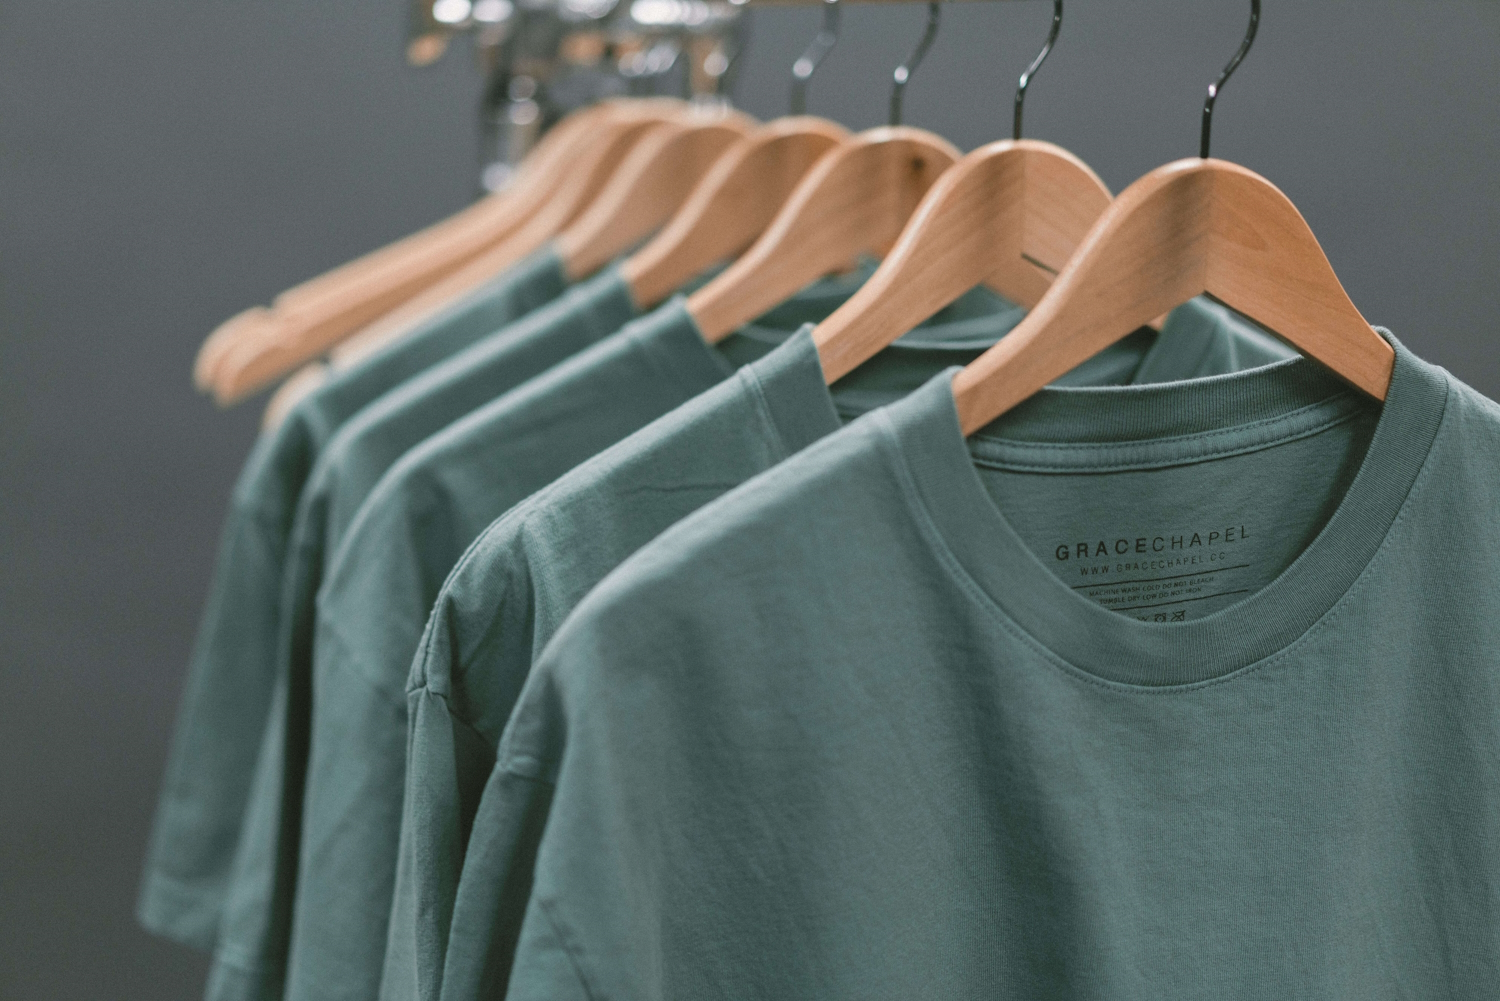 How to Start a T-Shirt Business in 10 Simple Steps